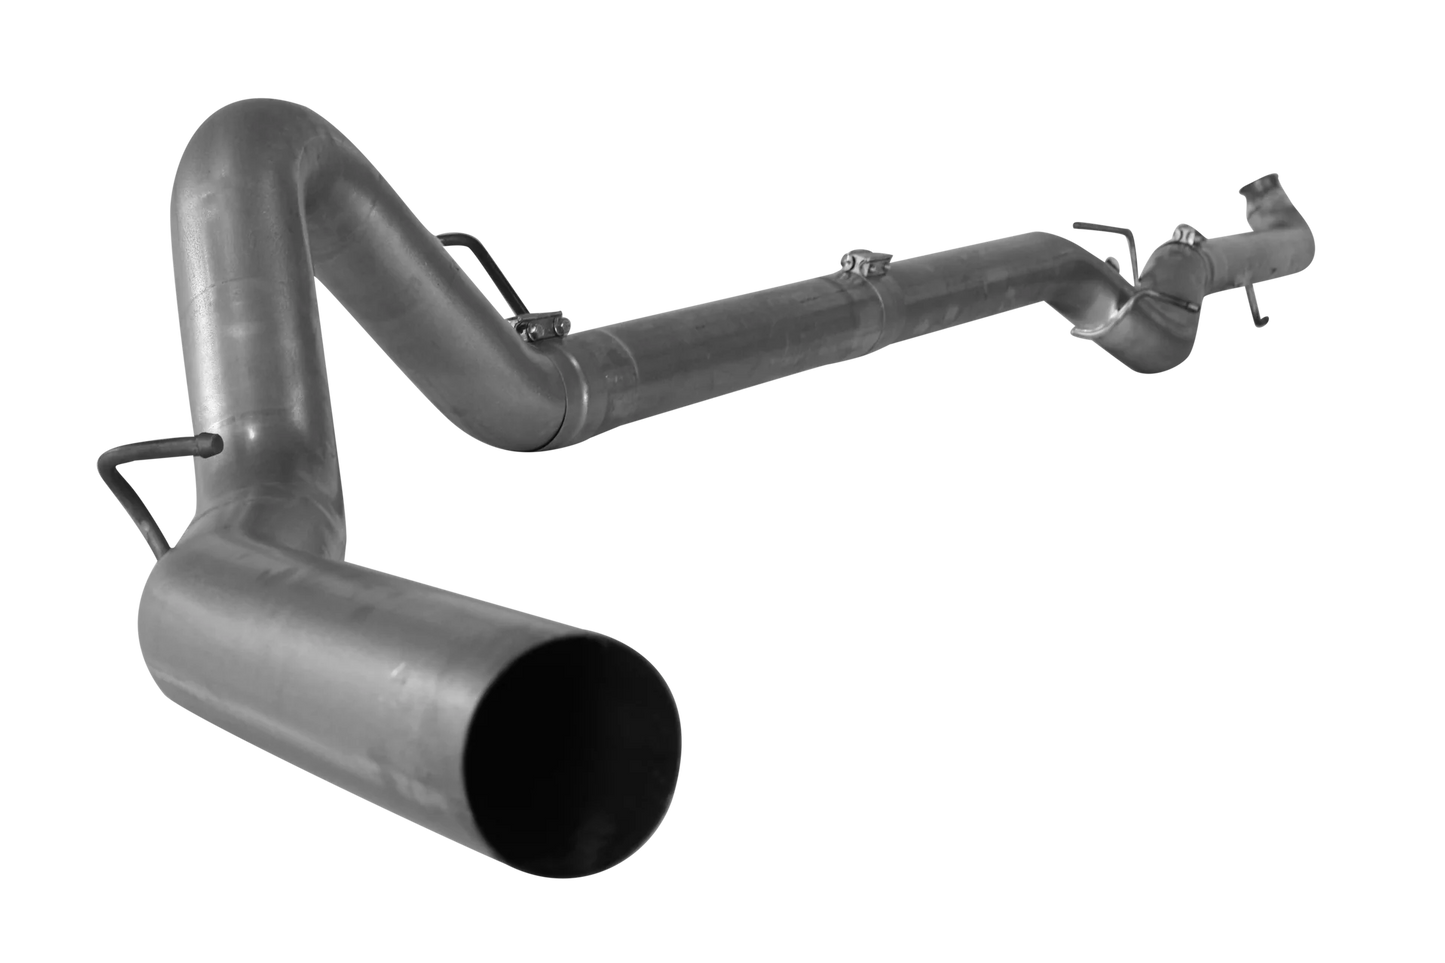 531100 531111 532100 532111 Mel's Manufacturing 5" Downpipe Back Single | 2001-2007 GM 2500/3500 6.6L DURAMAX Mels Mfg FloPro Flo-Pro Flo Pro Hell On Wheels Performance Ltd Limited Canadian Owned and Operated Online Diesel Parts Distribution & Wholesale Supply Center in Alberta Canada Shipping Supplying to Alberta British Columbia Sask Saskatchewan Manitoba Ontario Quebec Newfoundland Labrador New Brunswick Nova Scotia Prince Edward Island AB BC SK MB ON QC PQ NS NB NFLD N.L. PEI